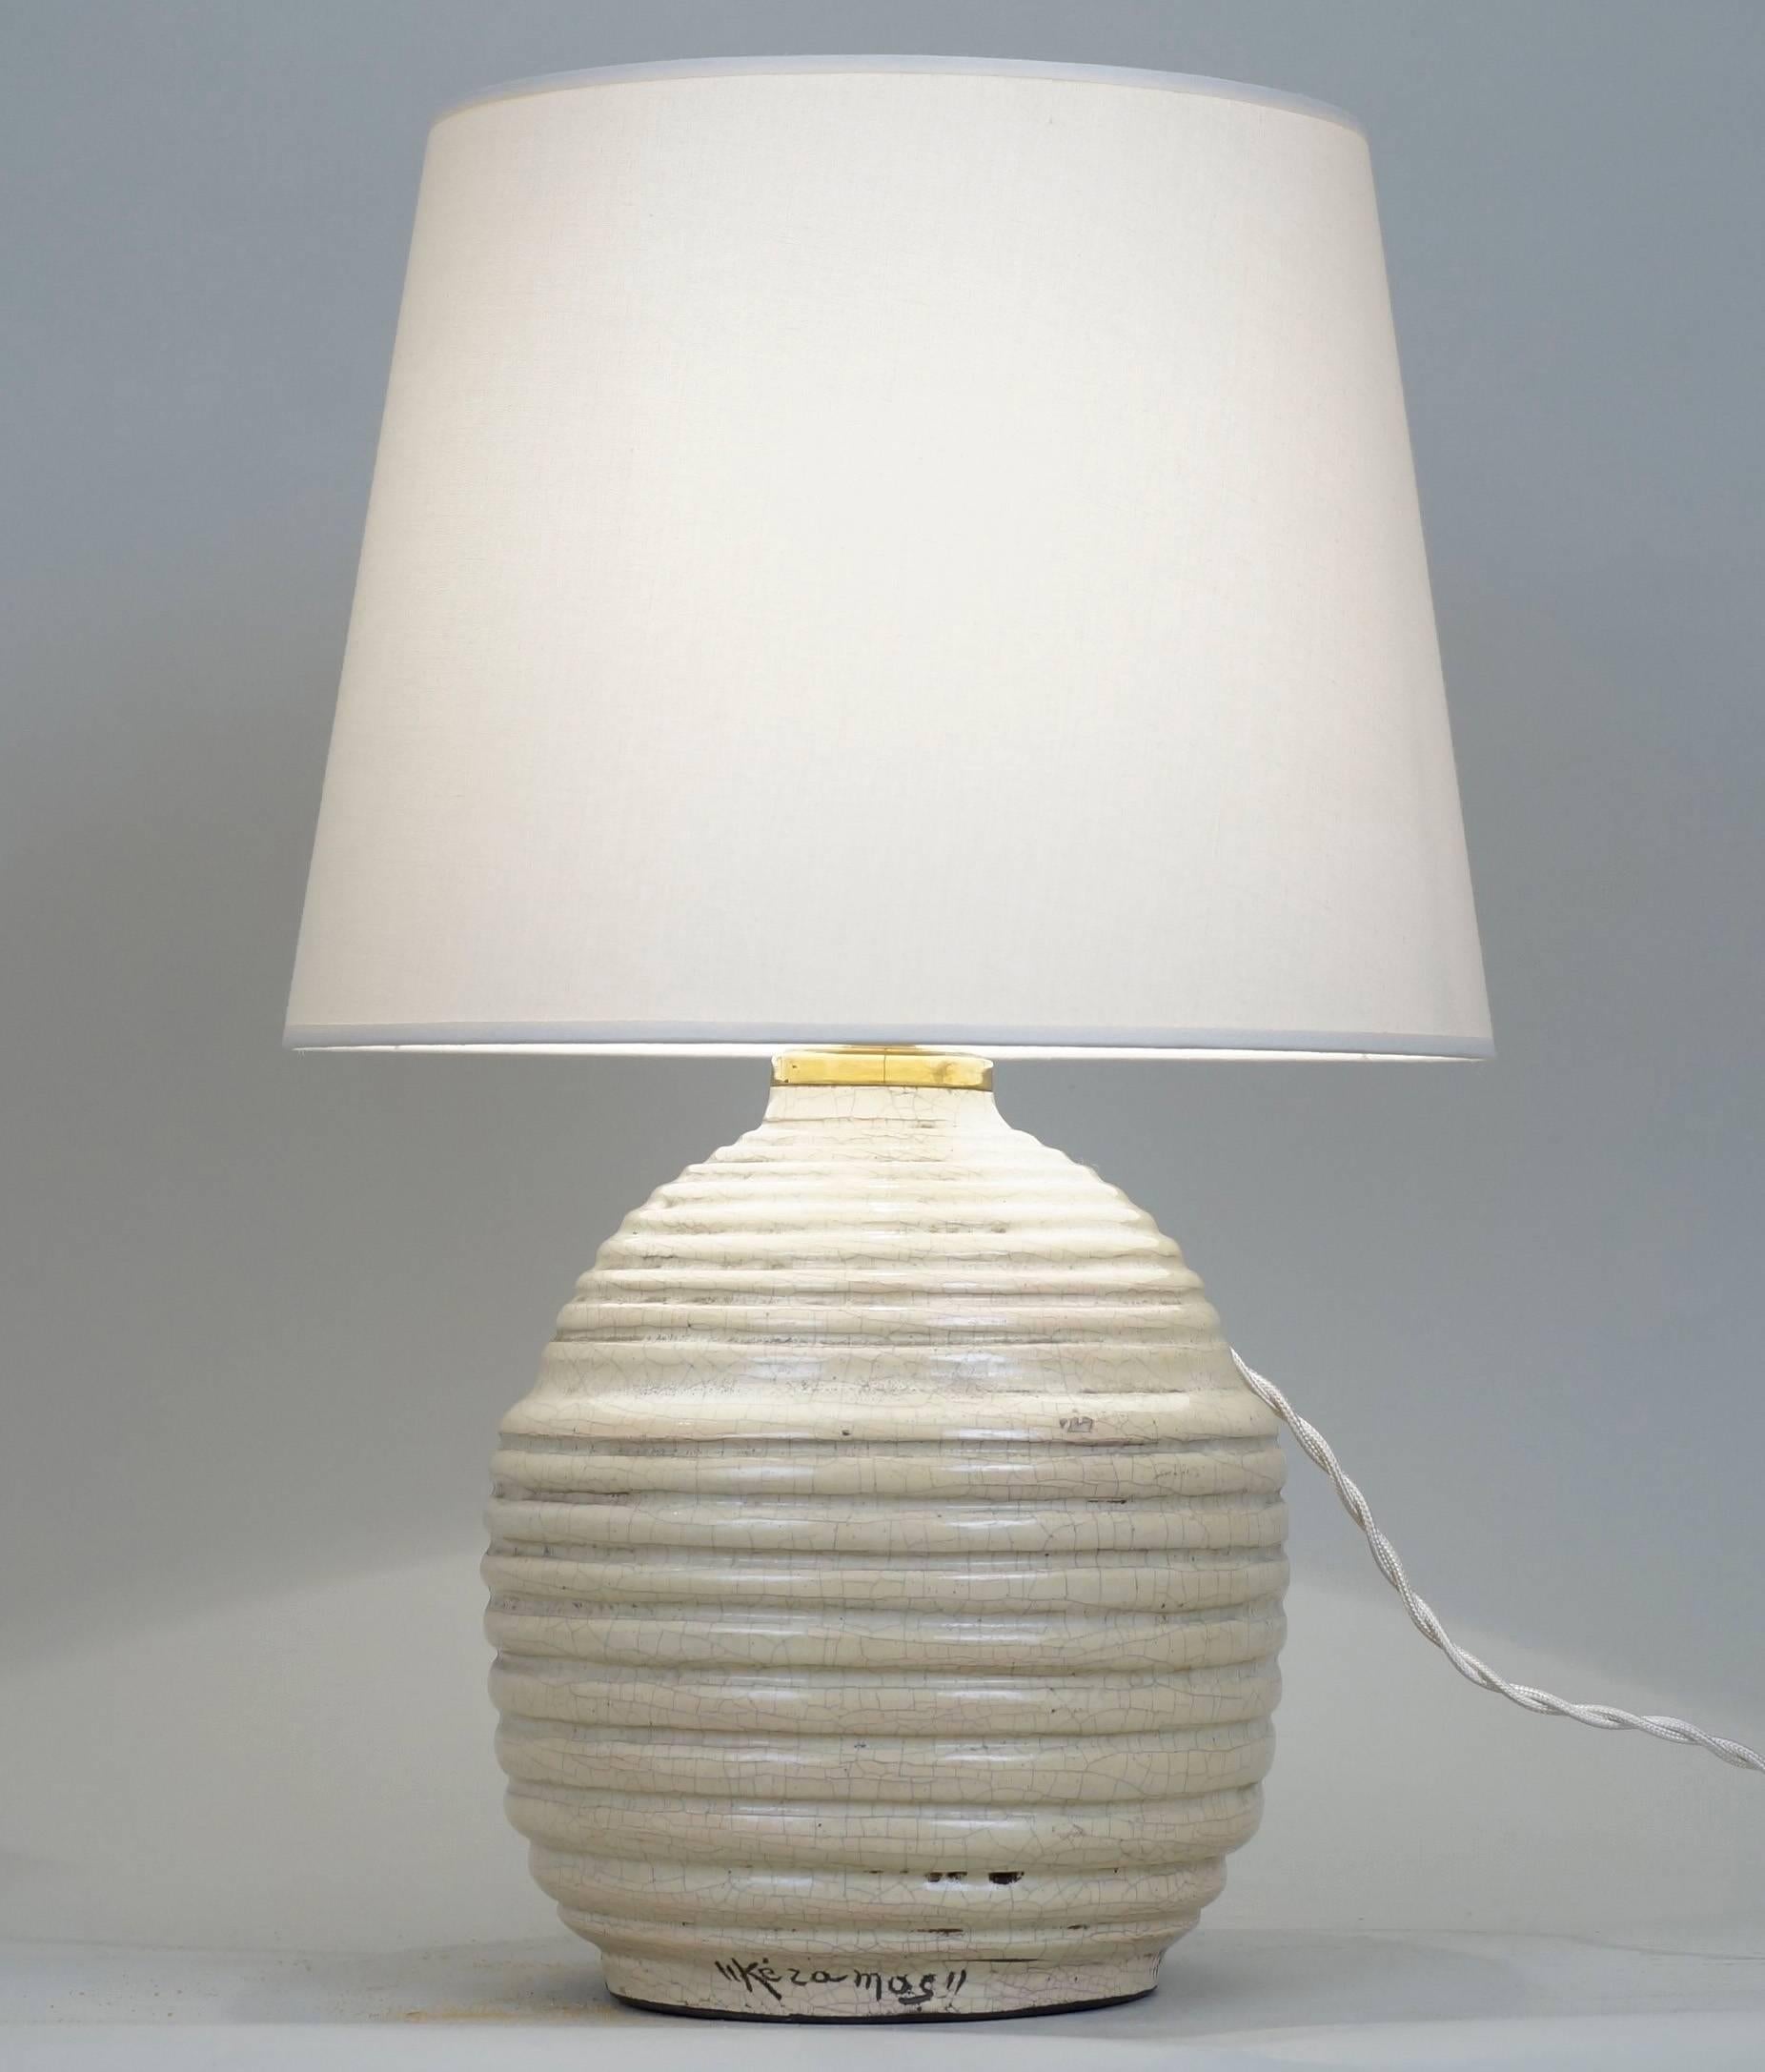 Spheral crackled ceramic table lamp signed Keramos.
Custom-made lampshade.
Rewired with twisted silk cord.
US standard plug on request.

Ceramic height: 21 cm - 8.3in.
Height with lampshade: 40 cm - 15.7 in.
   